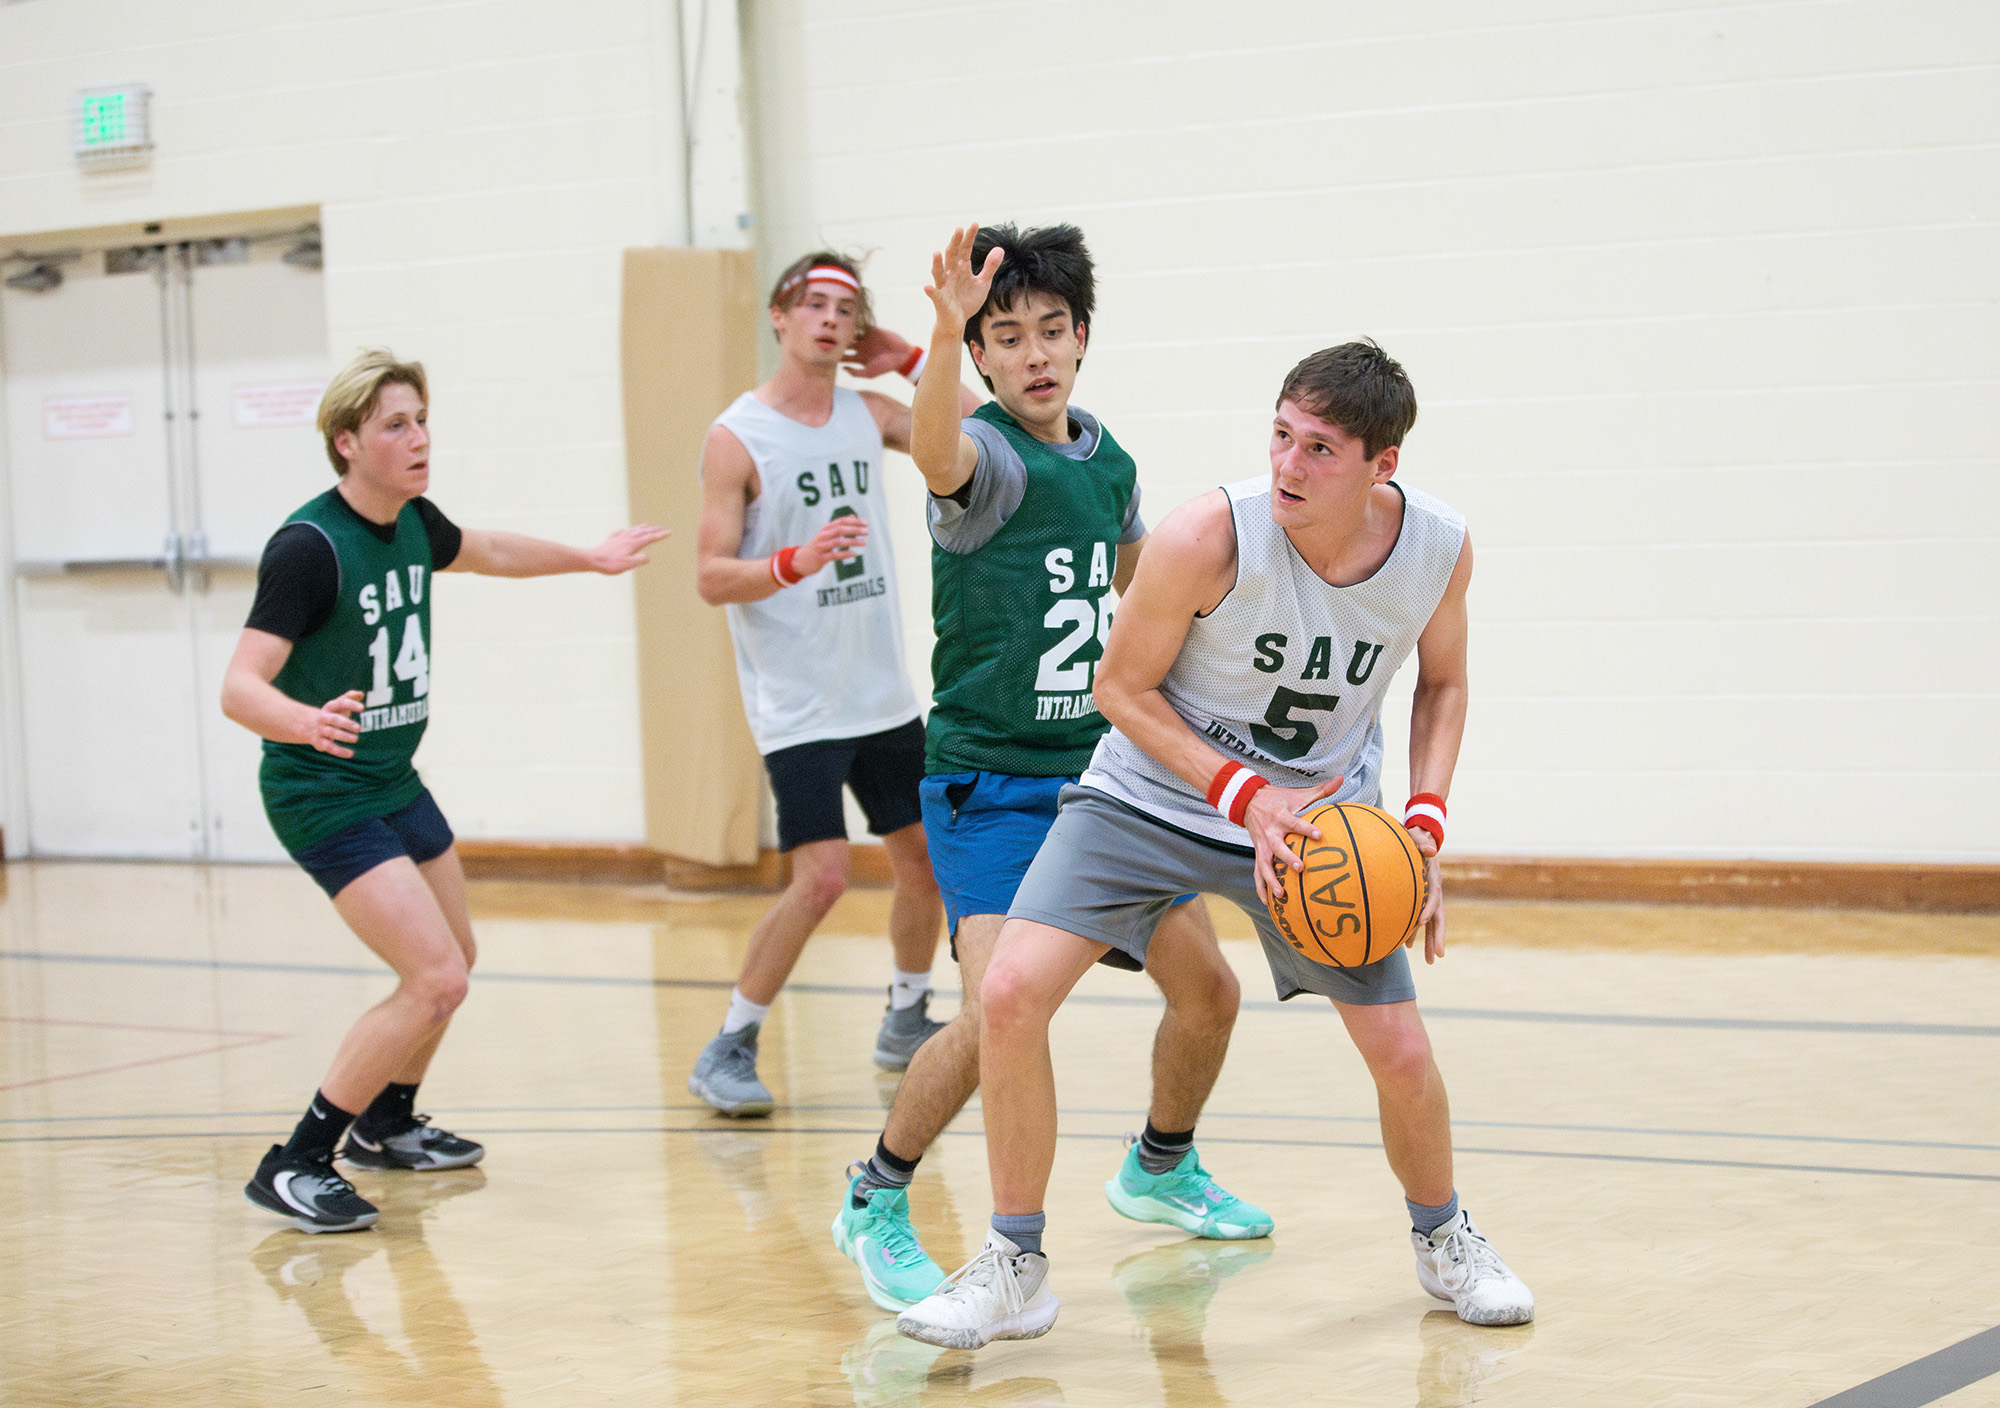 Students playing basketball during Southern Intramurals season